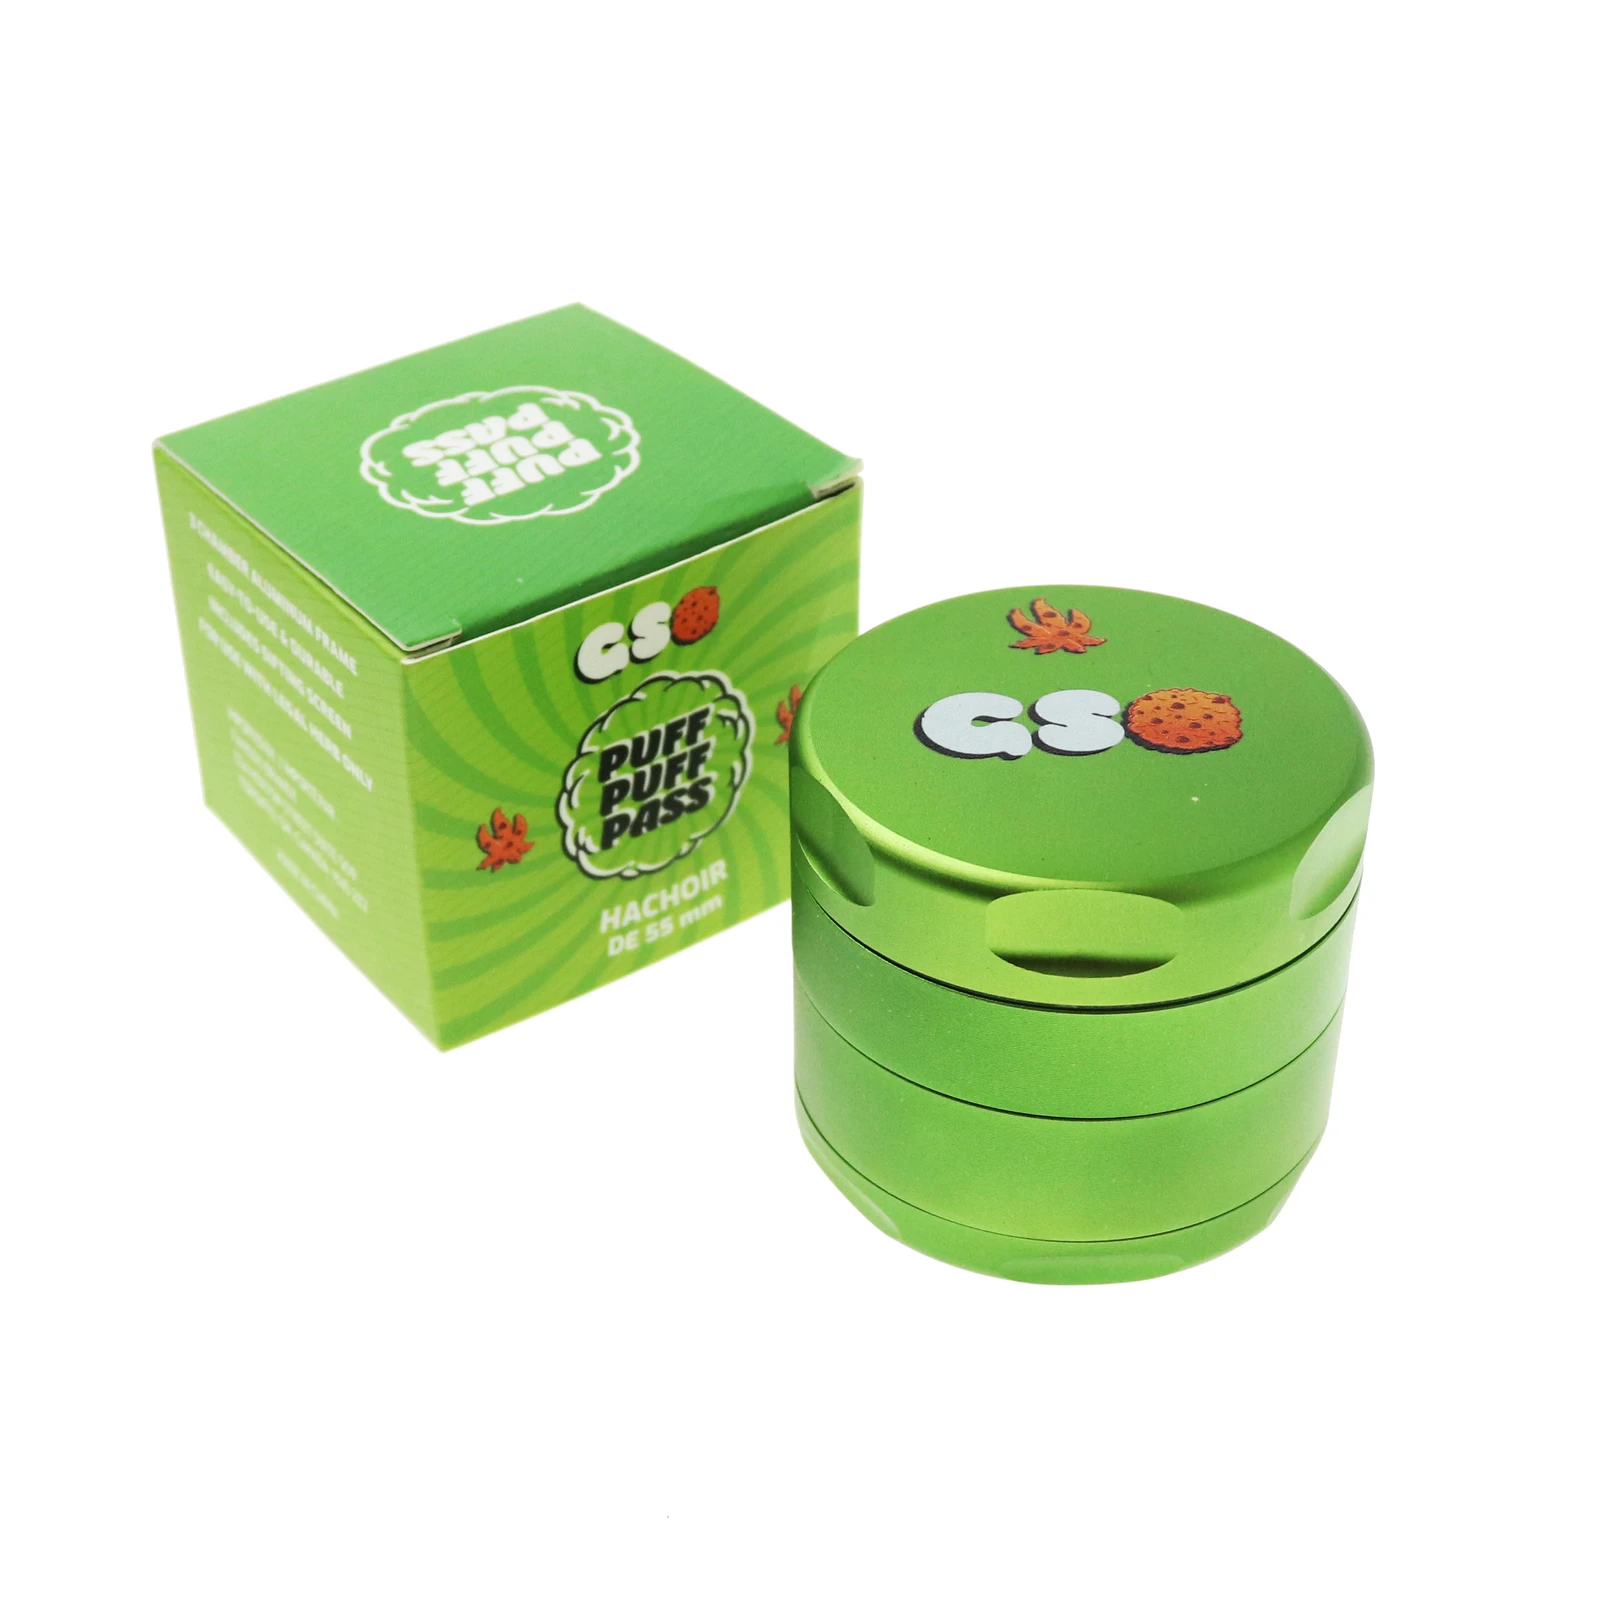 puff puff pass girl scout cookies grinder green